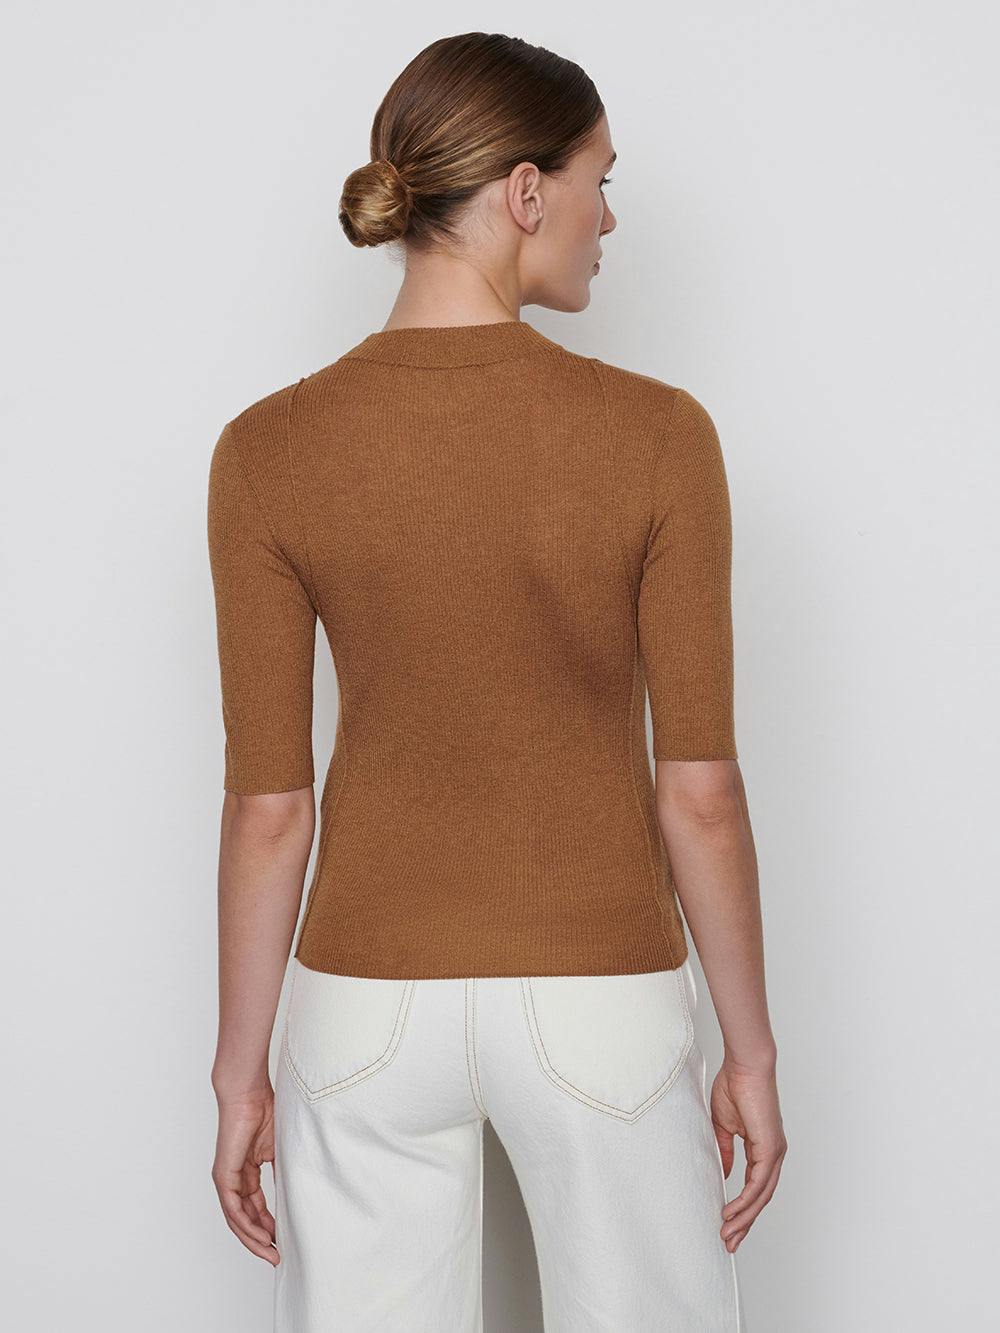 sweater side view 